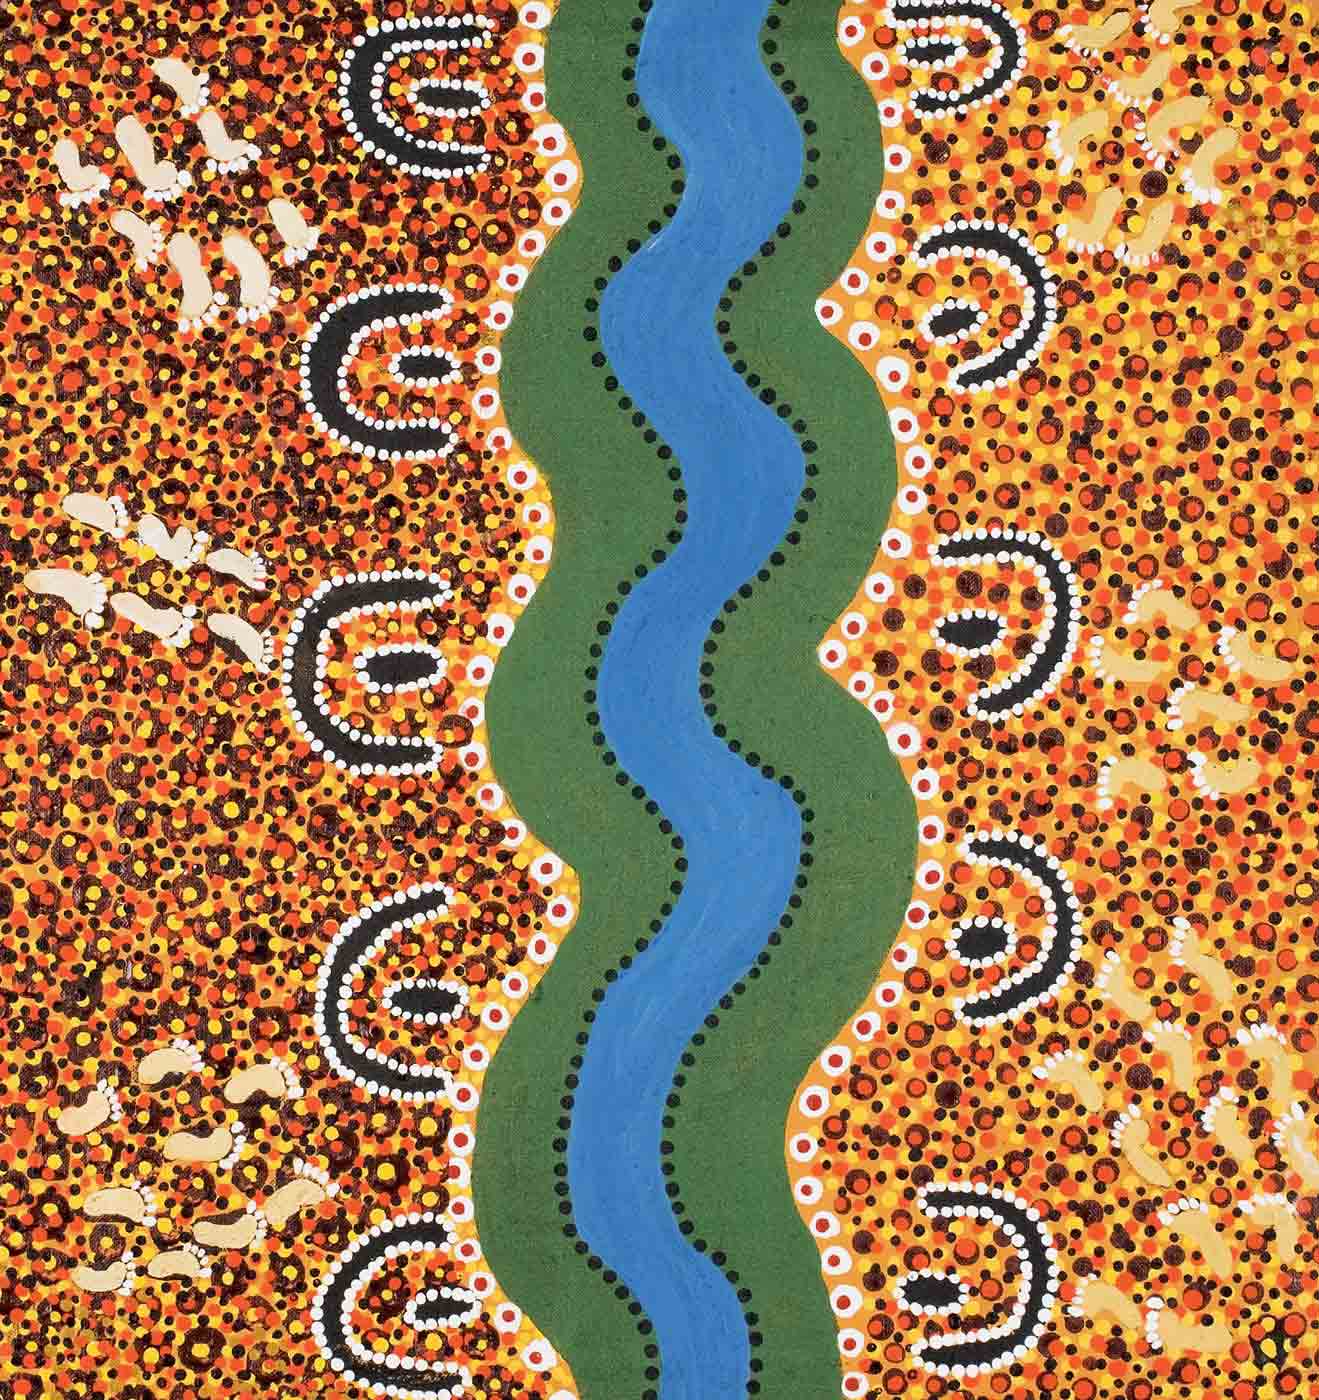 A square painting on brown linen with a yellow orange background and a wavy blue line flanked by a row of black dots then a thick green line in the centre. The yellow background is covered in yellow, orange, maroon and black dots, and has beige and white footprints in groups on both sides of the central feature. There are also semicircles in black edged with white dots, with an oval, similarly decorated, inside each one, on both sides of the central feature. - click to view larger image